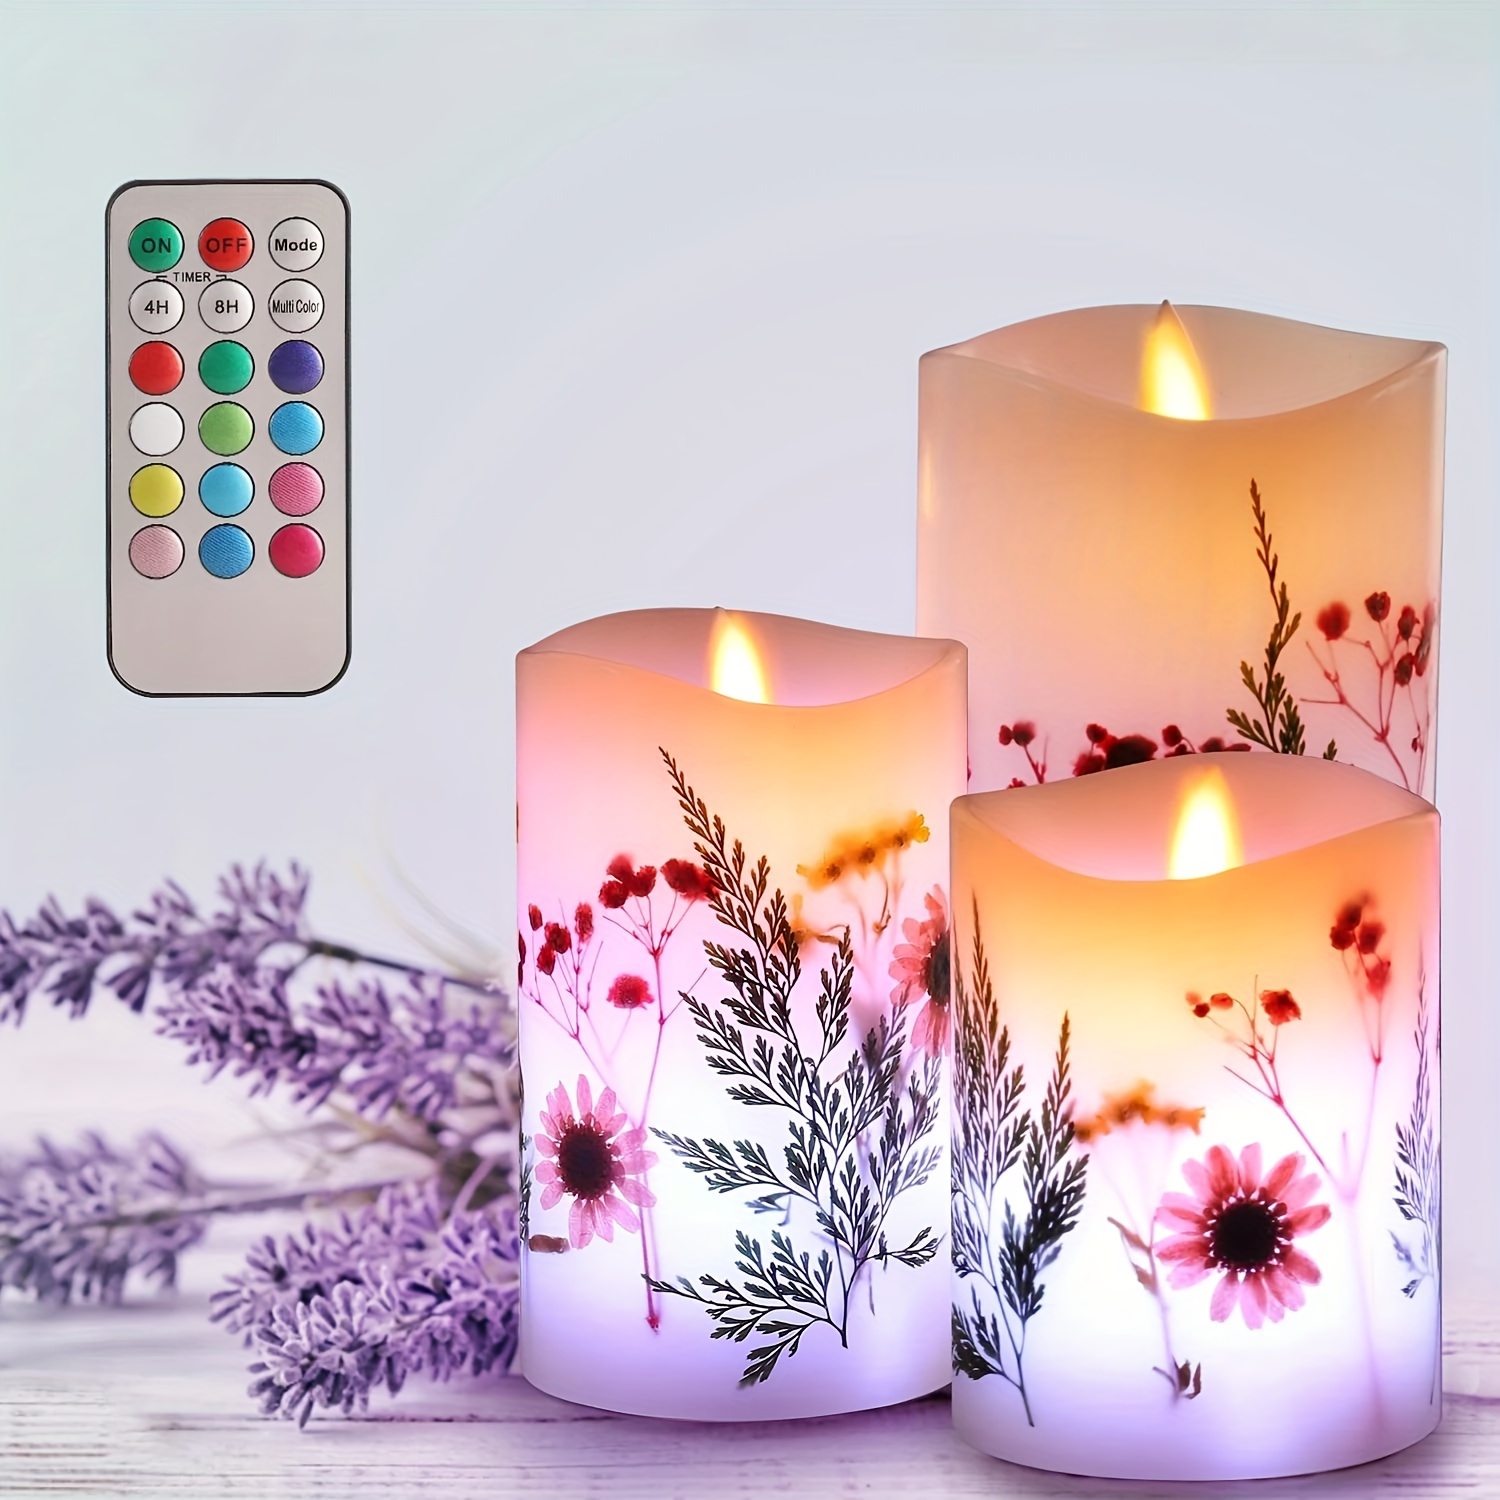 

3pcs Flickering Flameless Candles, Moving Wick Candles With Timer And Rgb Remote, Real Wax Candle Lights With Dried Flower Inclusion, Led Pillar Candles